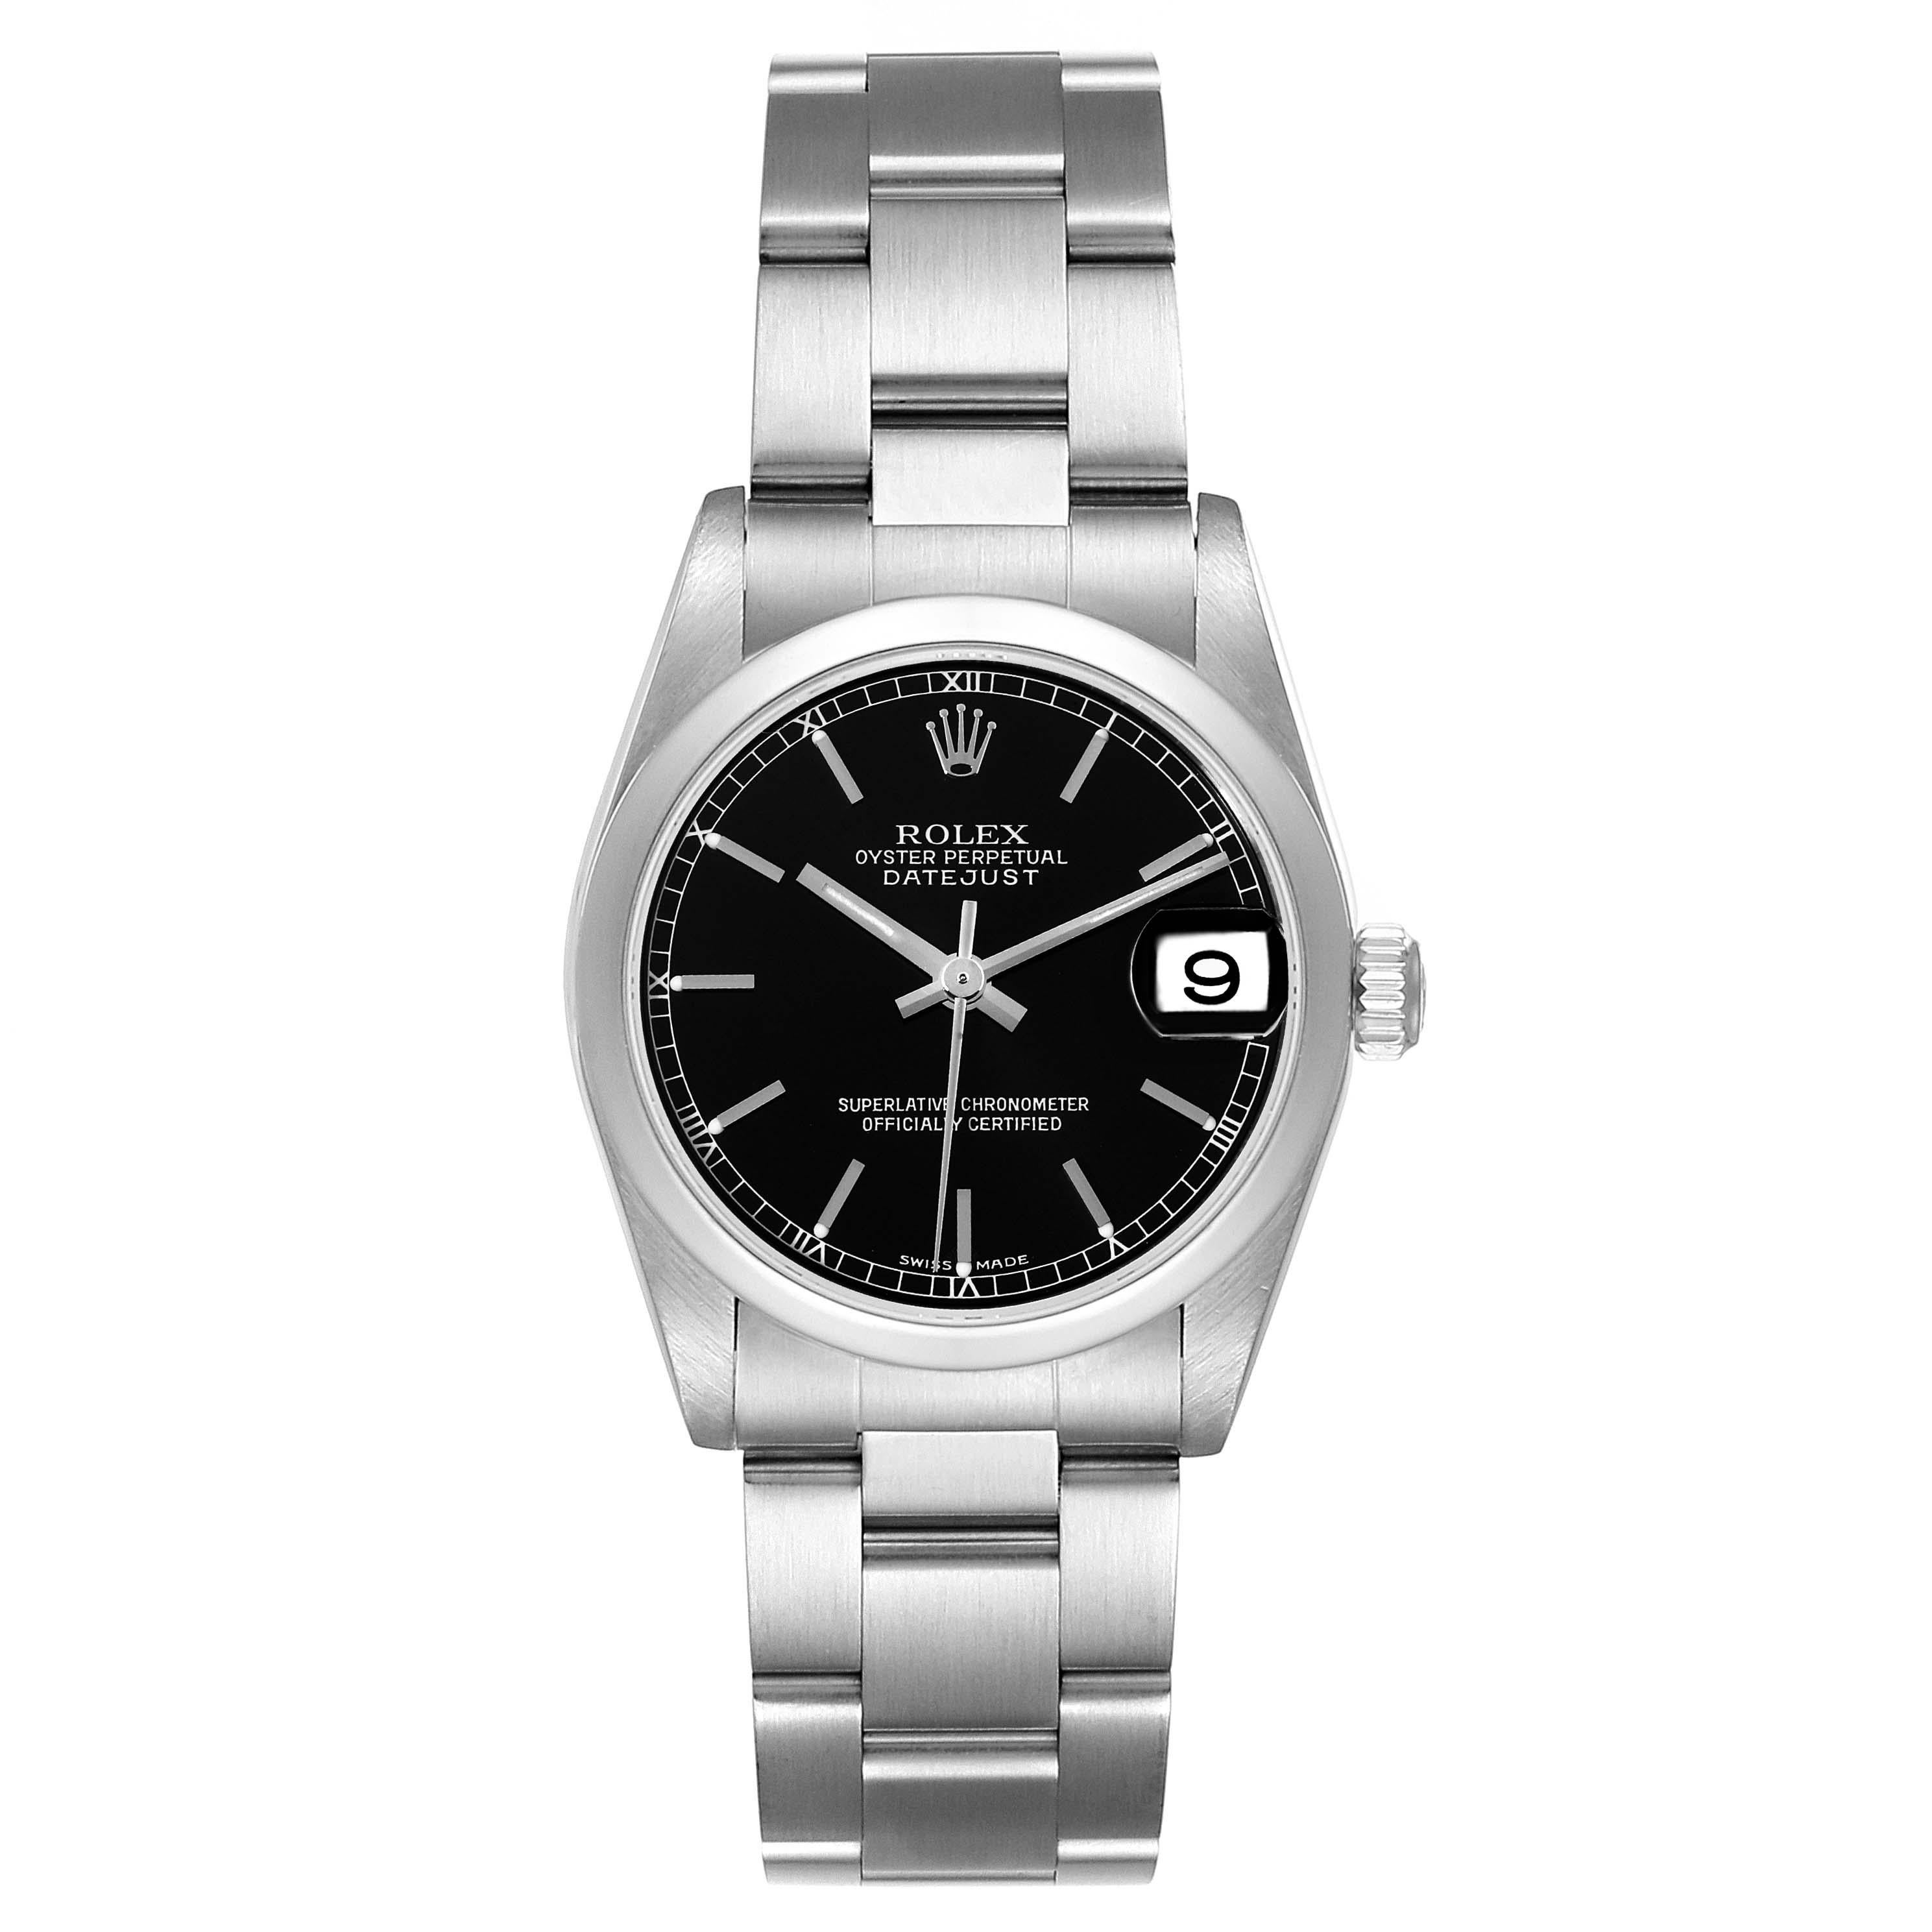 Rolex Datejust 31 Midsize Black Dial Steel Ladies Watch 78240 Box Papers. Officially certified chronometer automatic self-winding movement with quickset date function. Stainless steel oyster case 31.0 mm in diameter. Rolex logo on the crown.